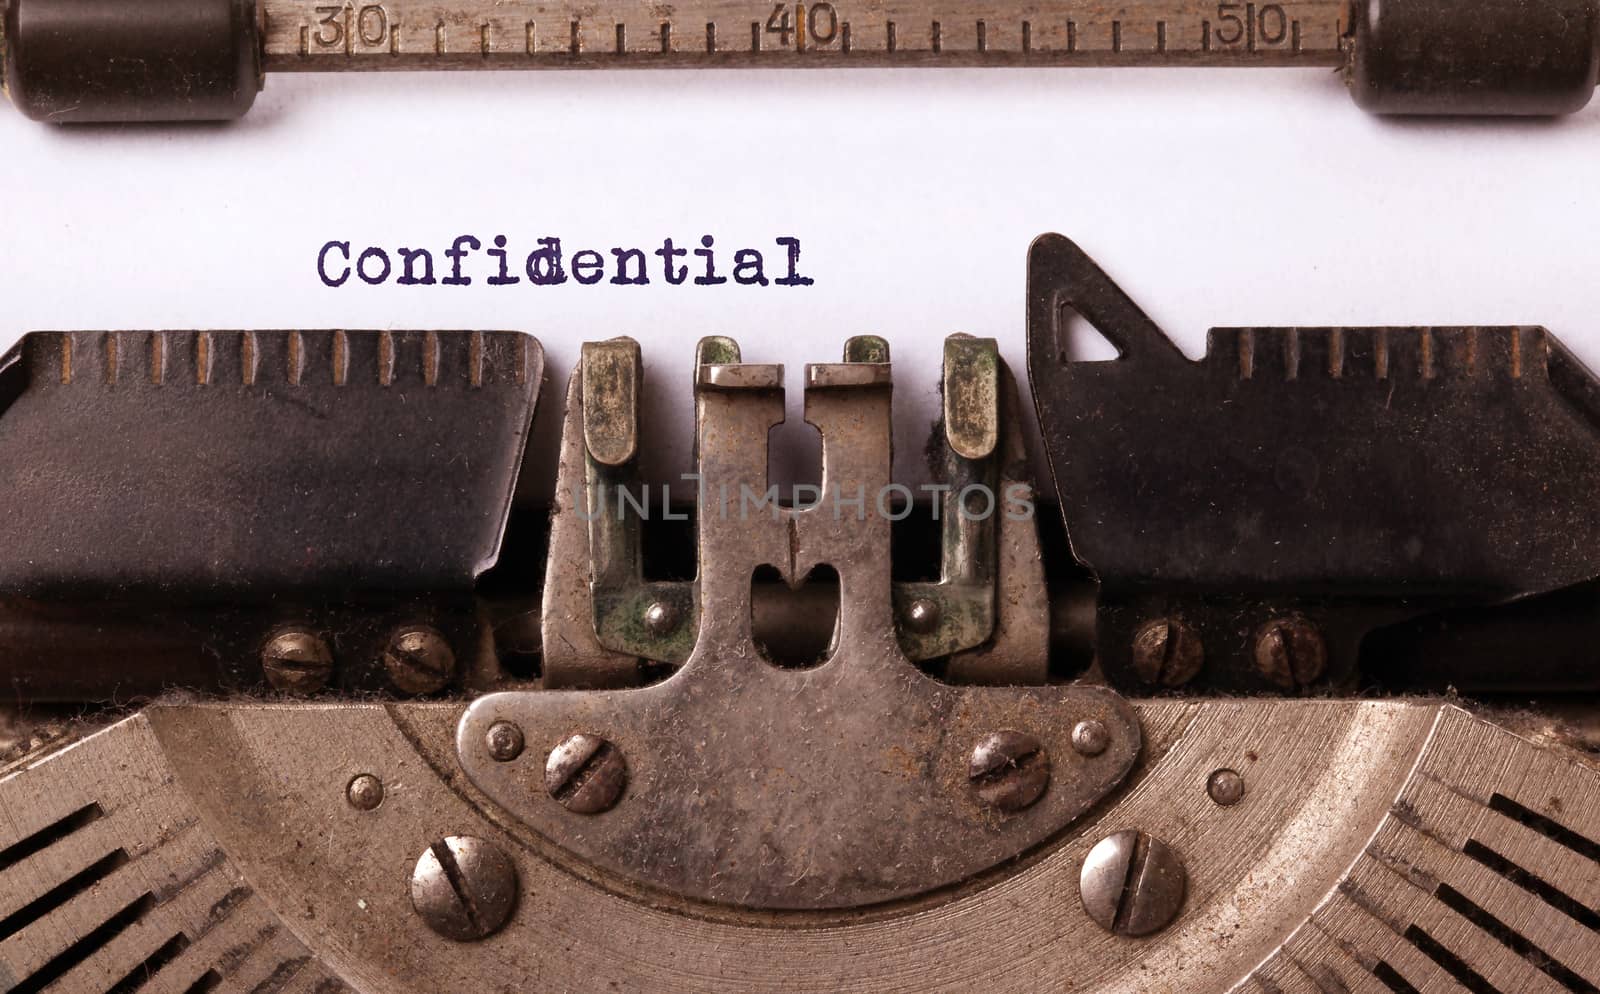 Vintage inscription made by old typewriter, confidential